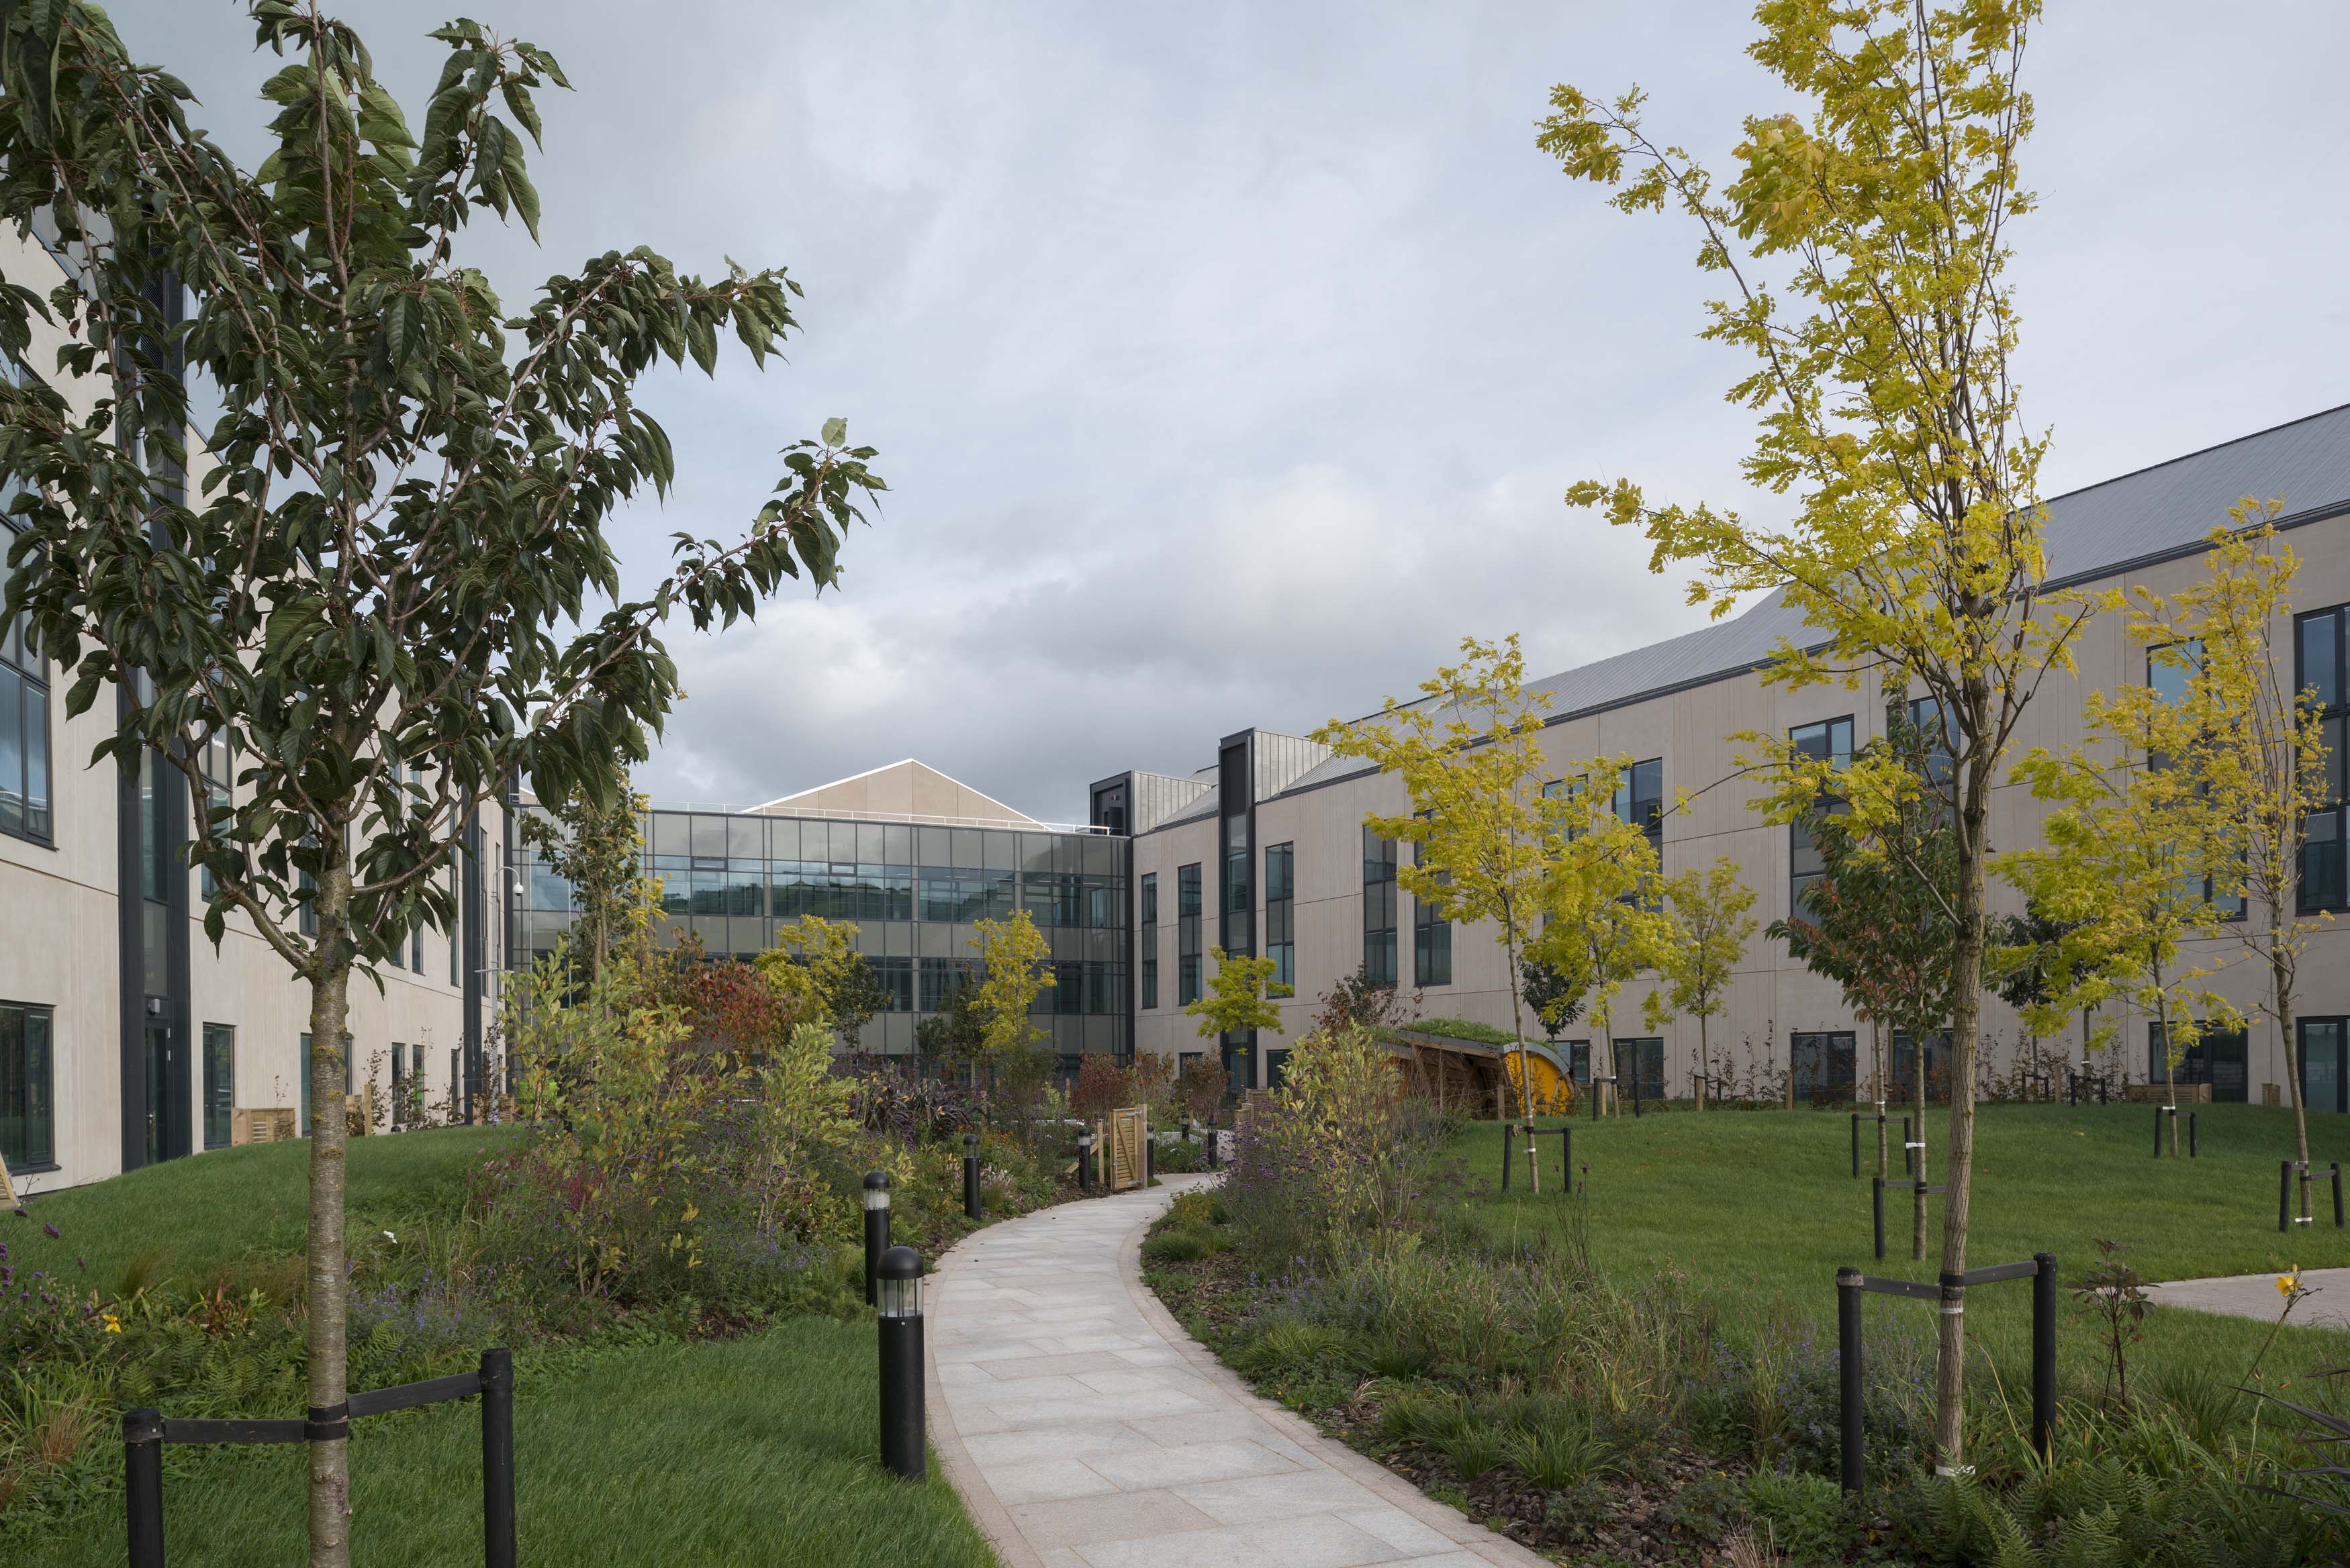 Outdoor space is key to the design of the new hospital